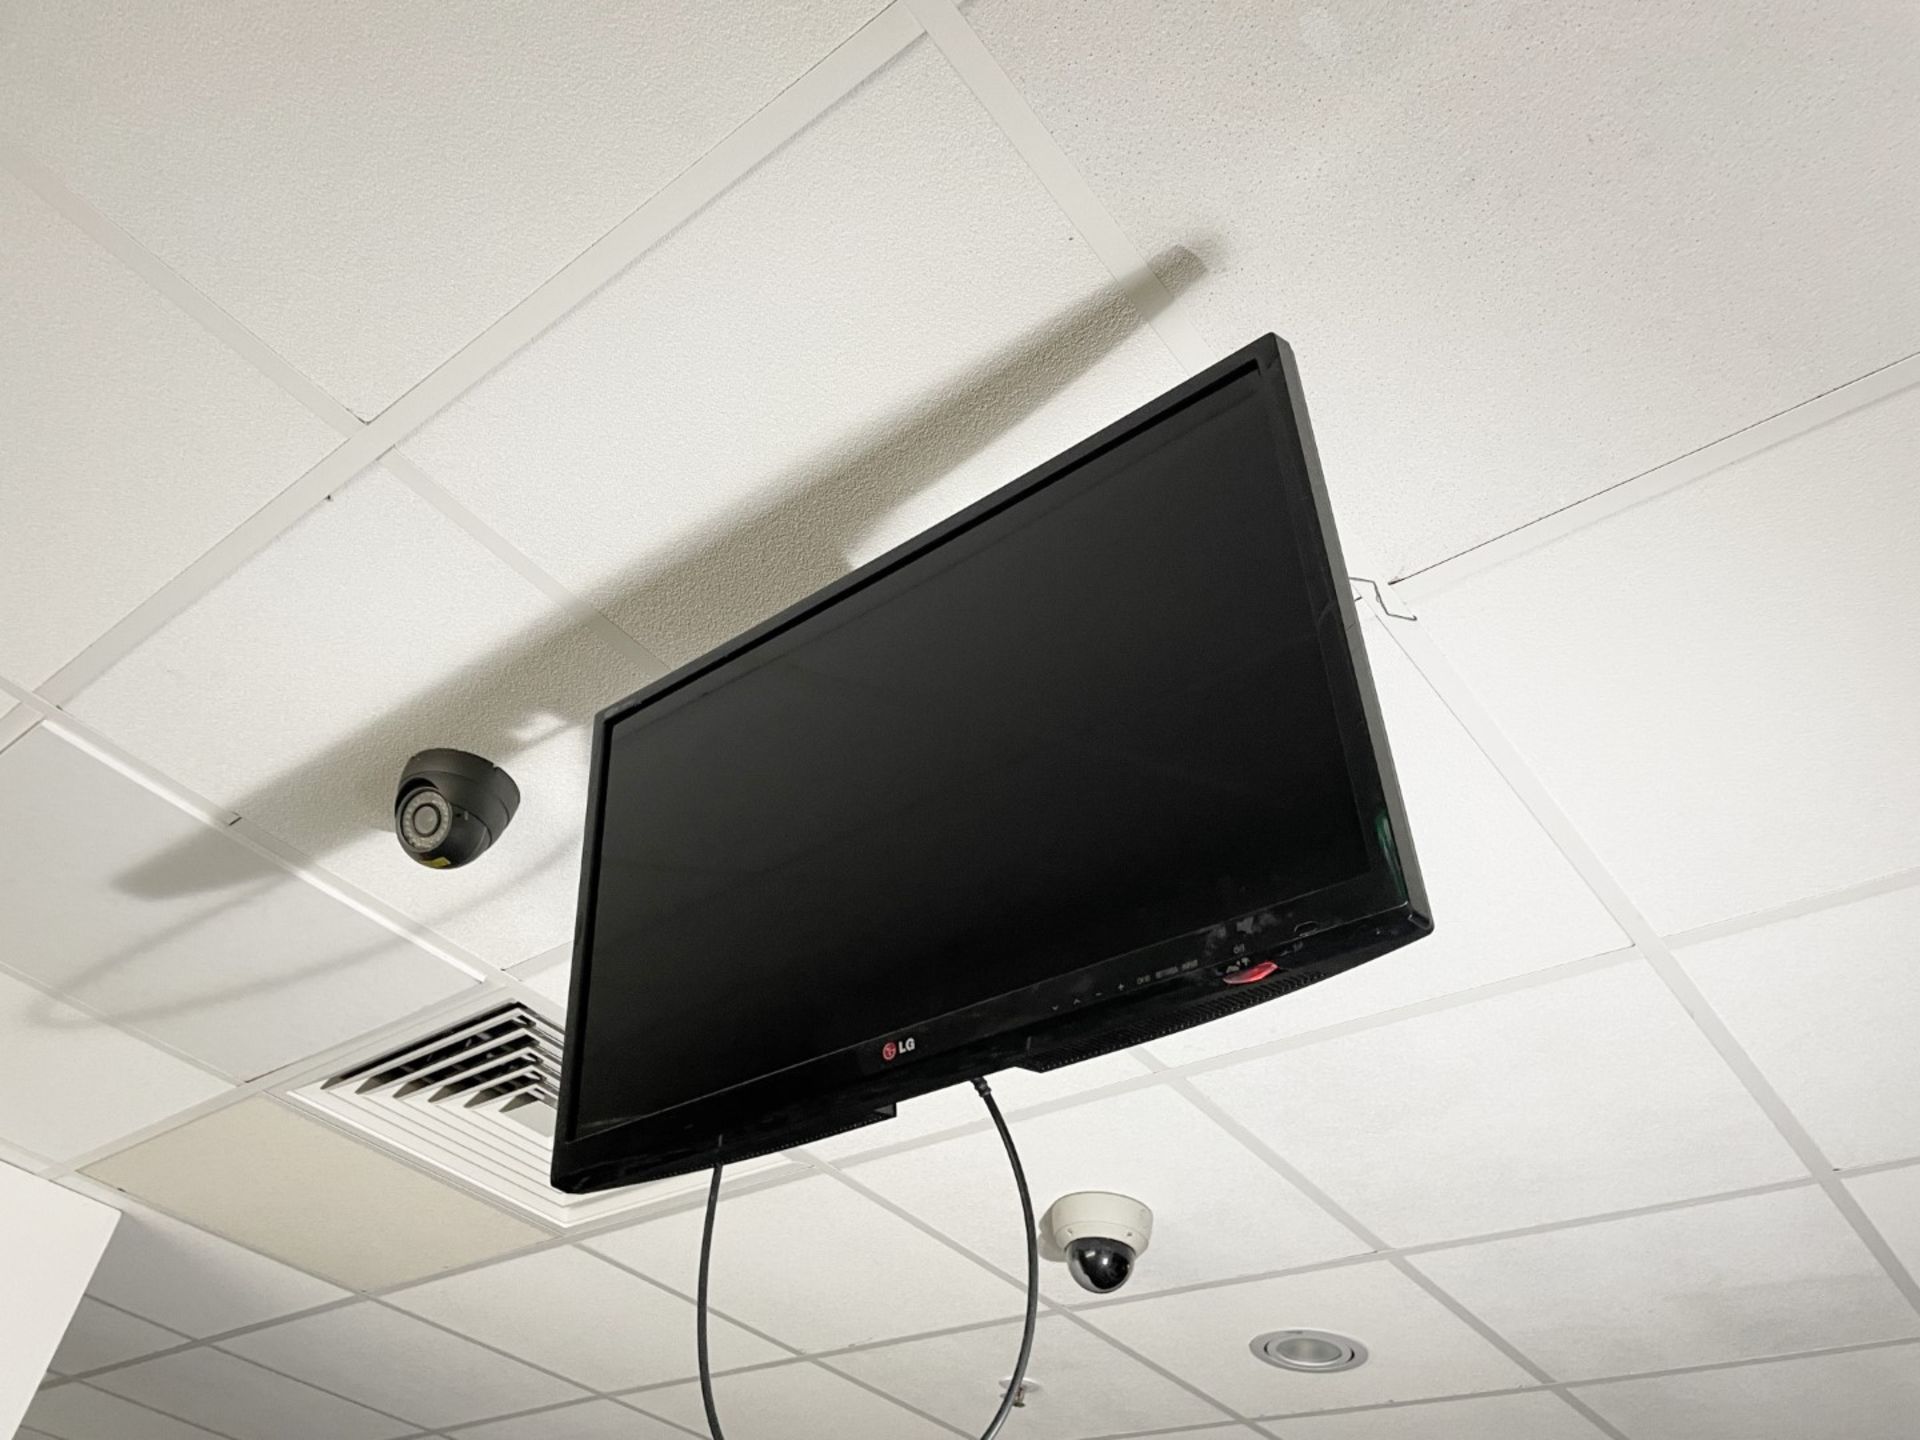 3 x LG 29 Inch LED Monitors With TV Tuners and Ceiling Mounts - CL670 - Ref: GEM205 - Location: - Image 5 of 7